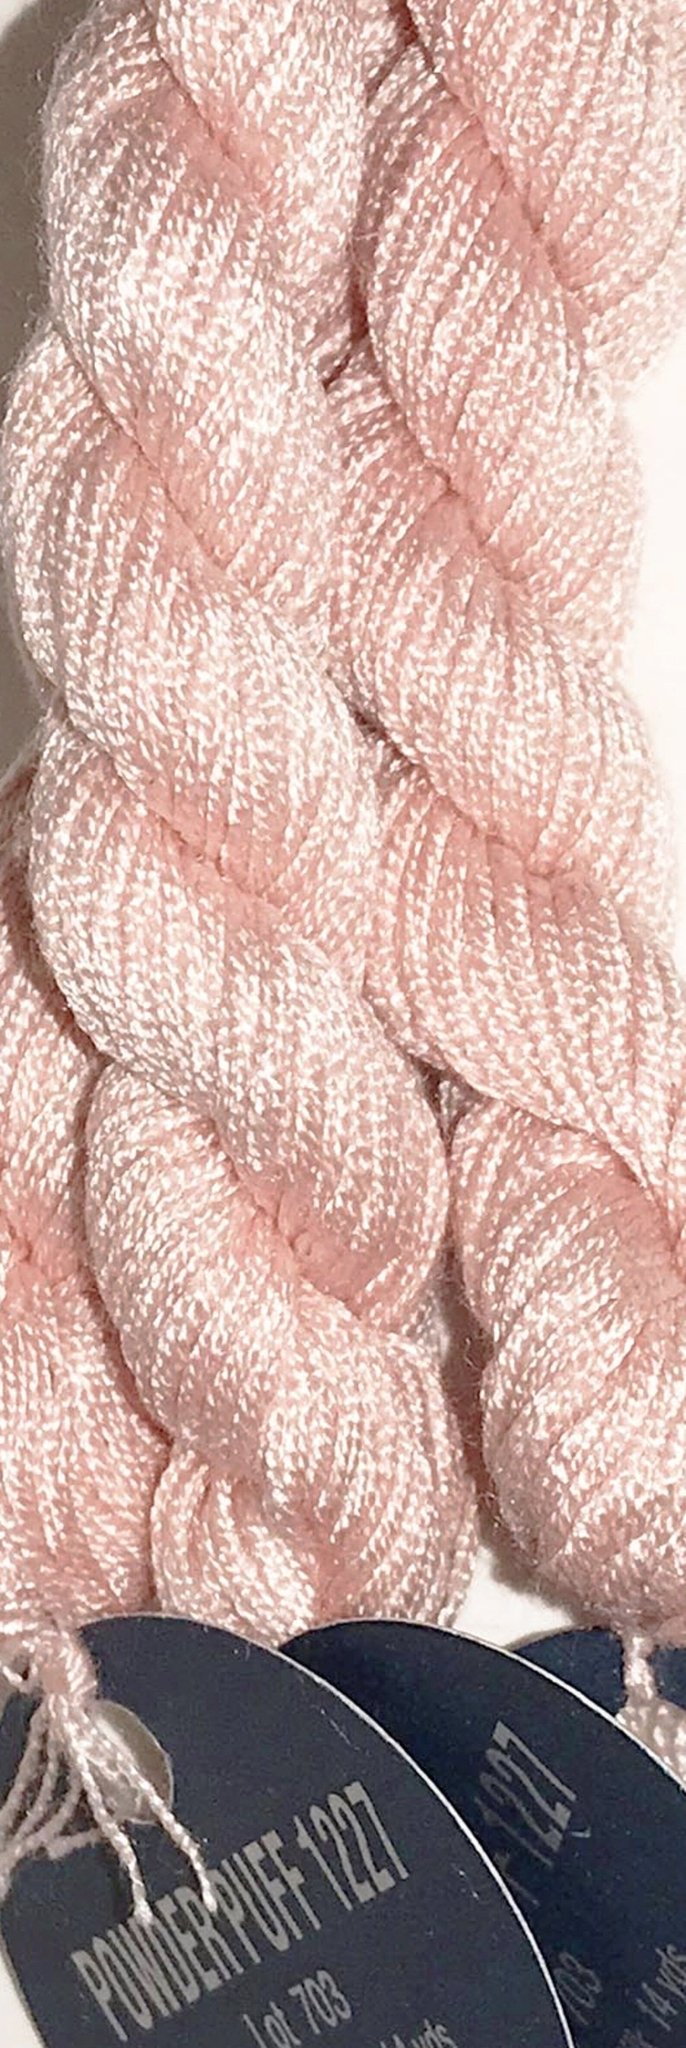 Planet Earth 6 Ply 1227 Powder Puff - The Flying Needles